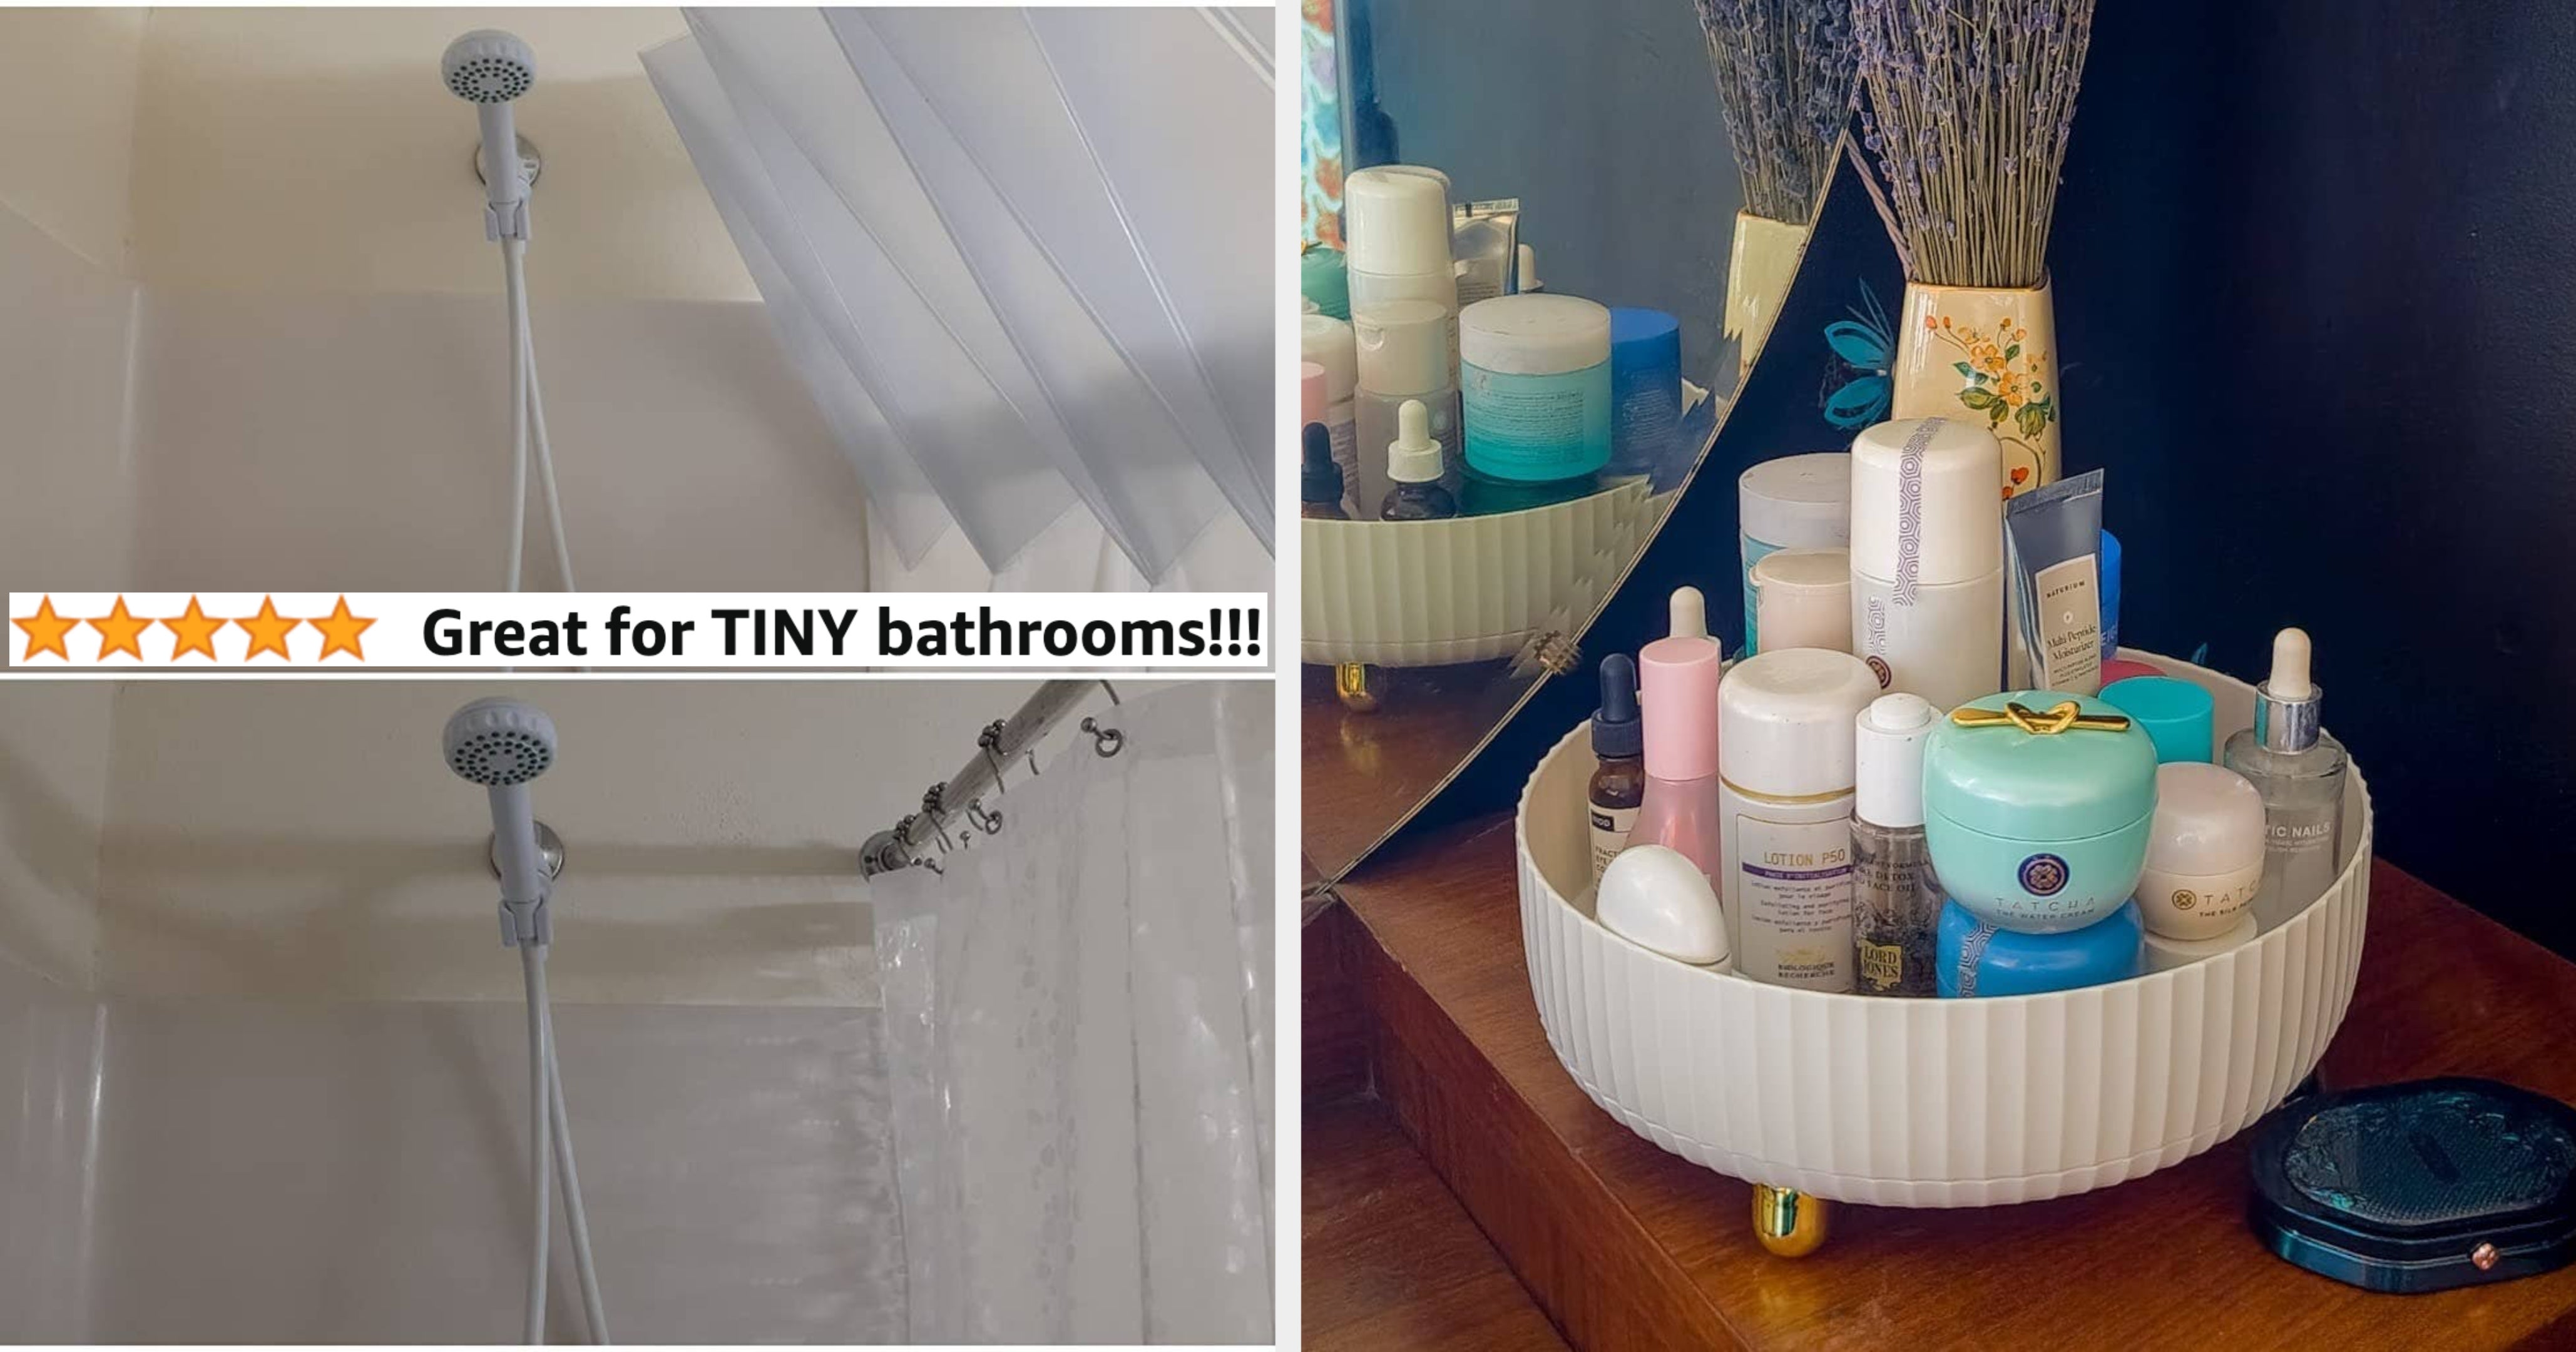 29 Bathroom Products With Wow-Worthy Results